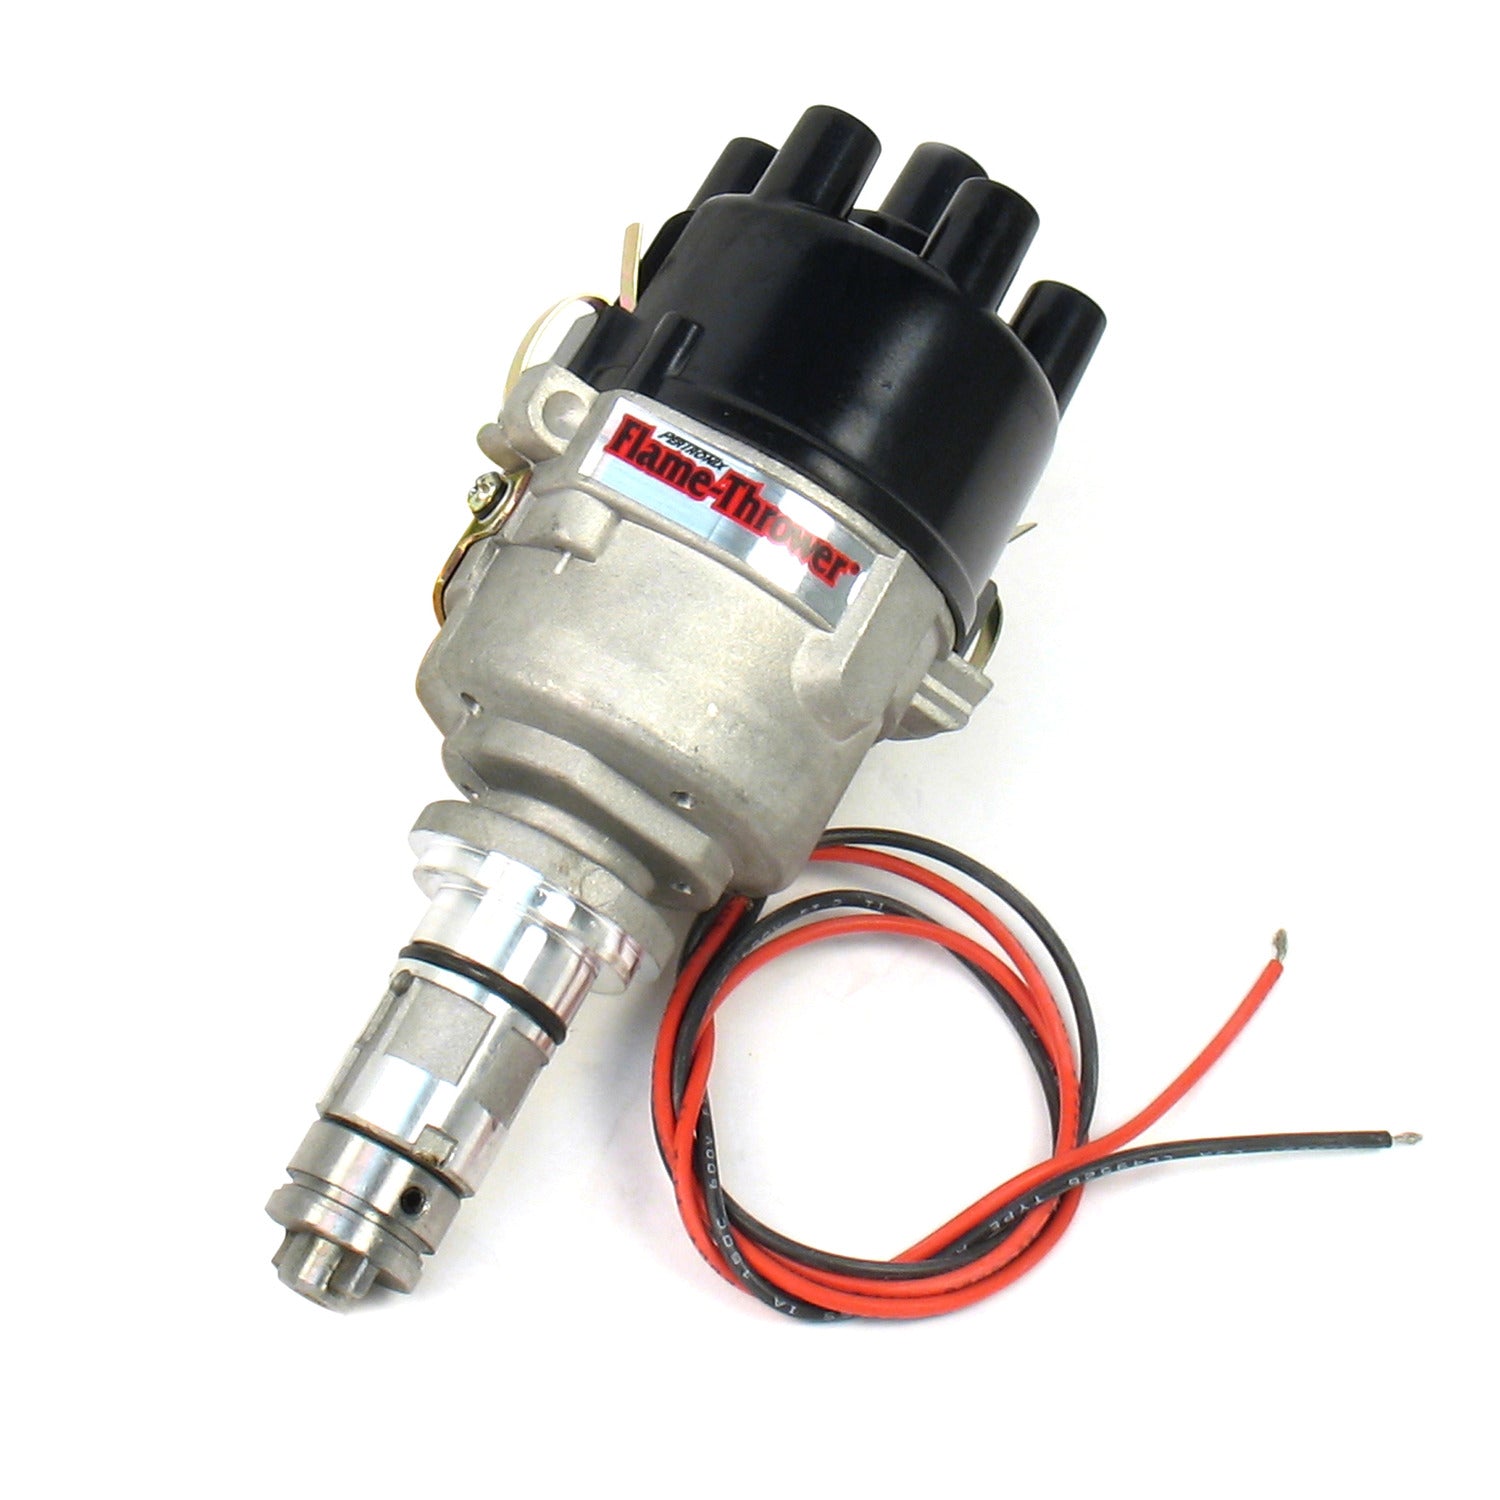 PerTronix D177628 Flame-Thrower Electronic Distributor Cast British 6 cyl Plug and Play with Ignitor Non Vacuum Advance